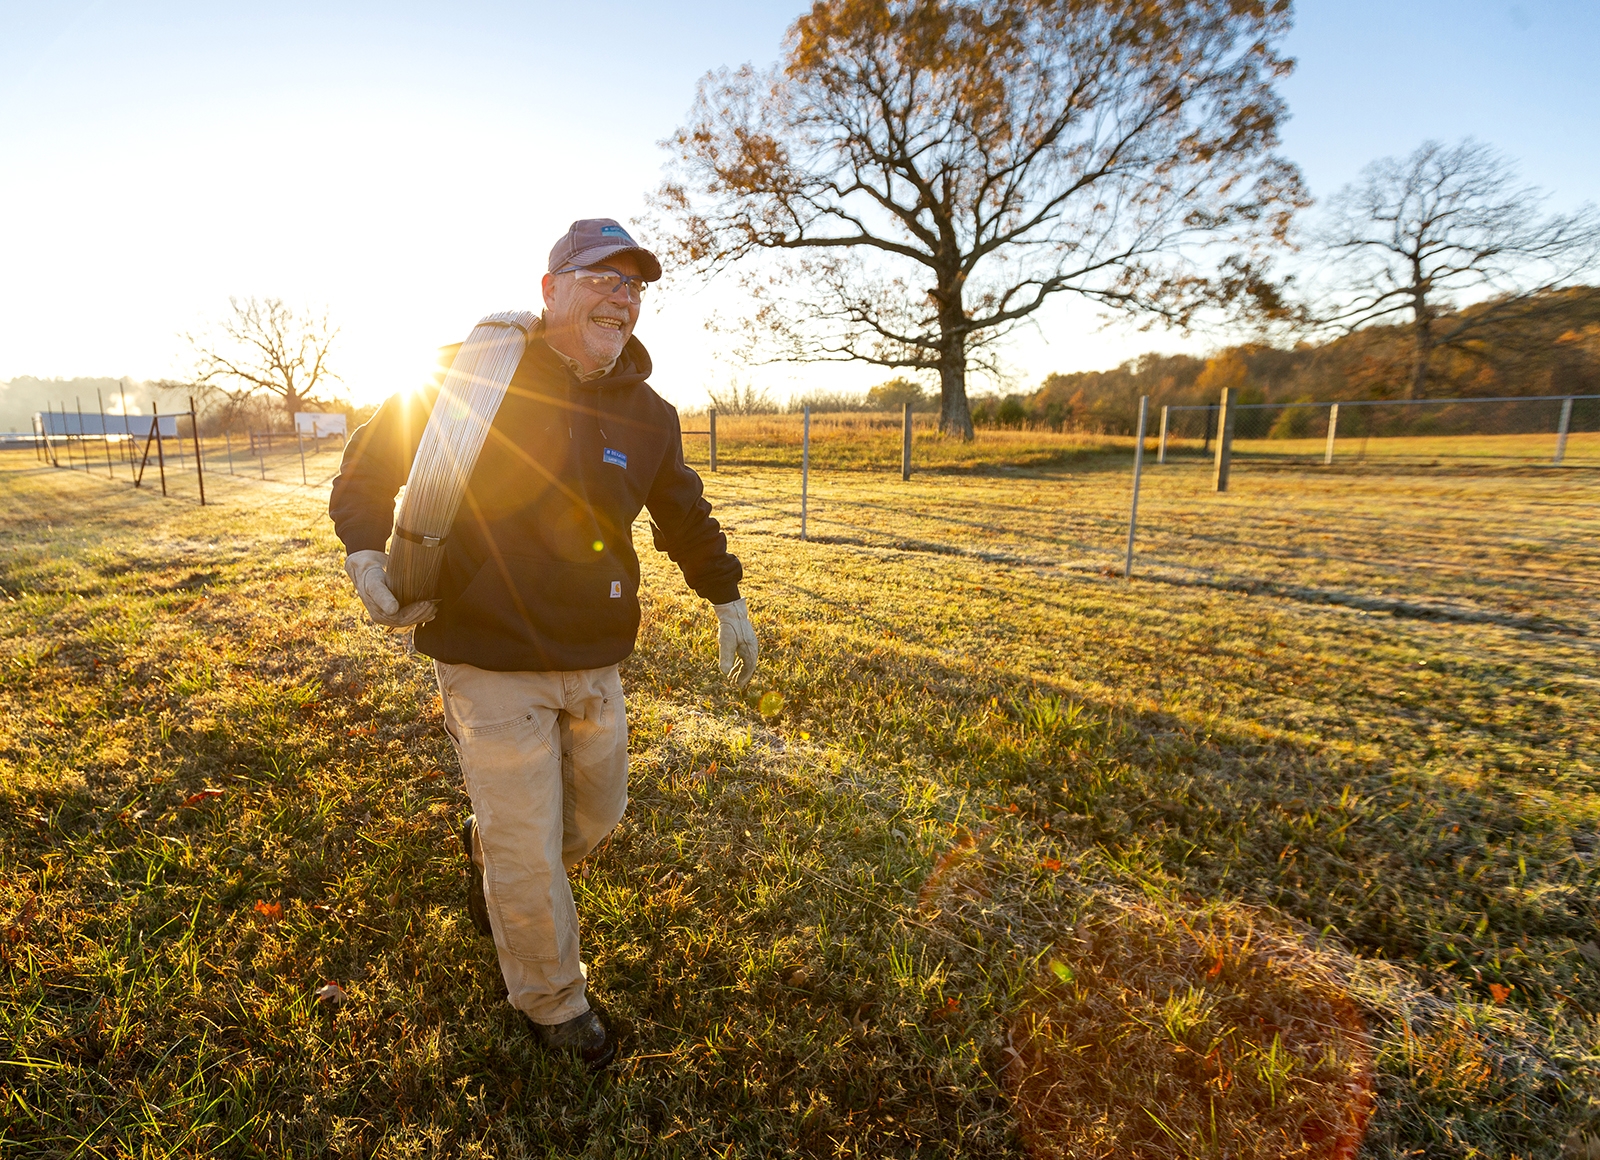 Portrait of a man carrying a coil of metal through a field in the early morning.